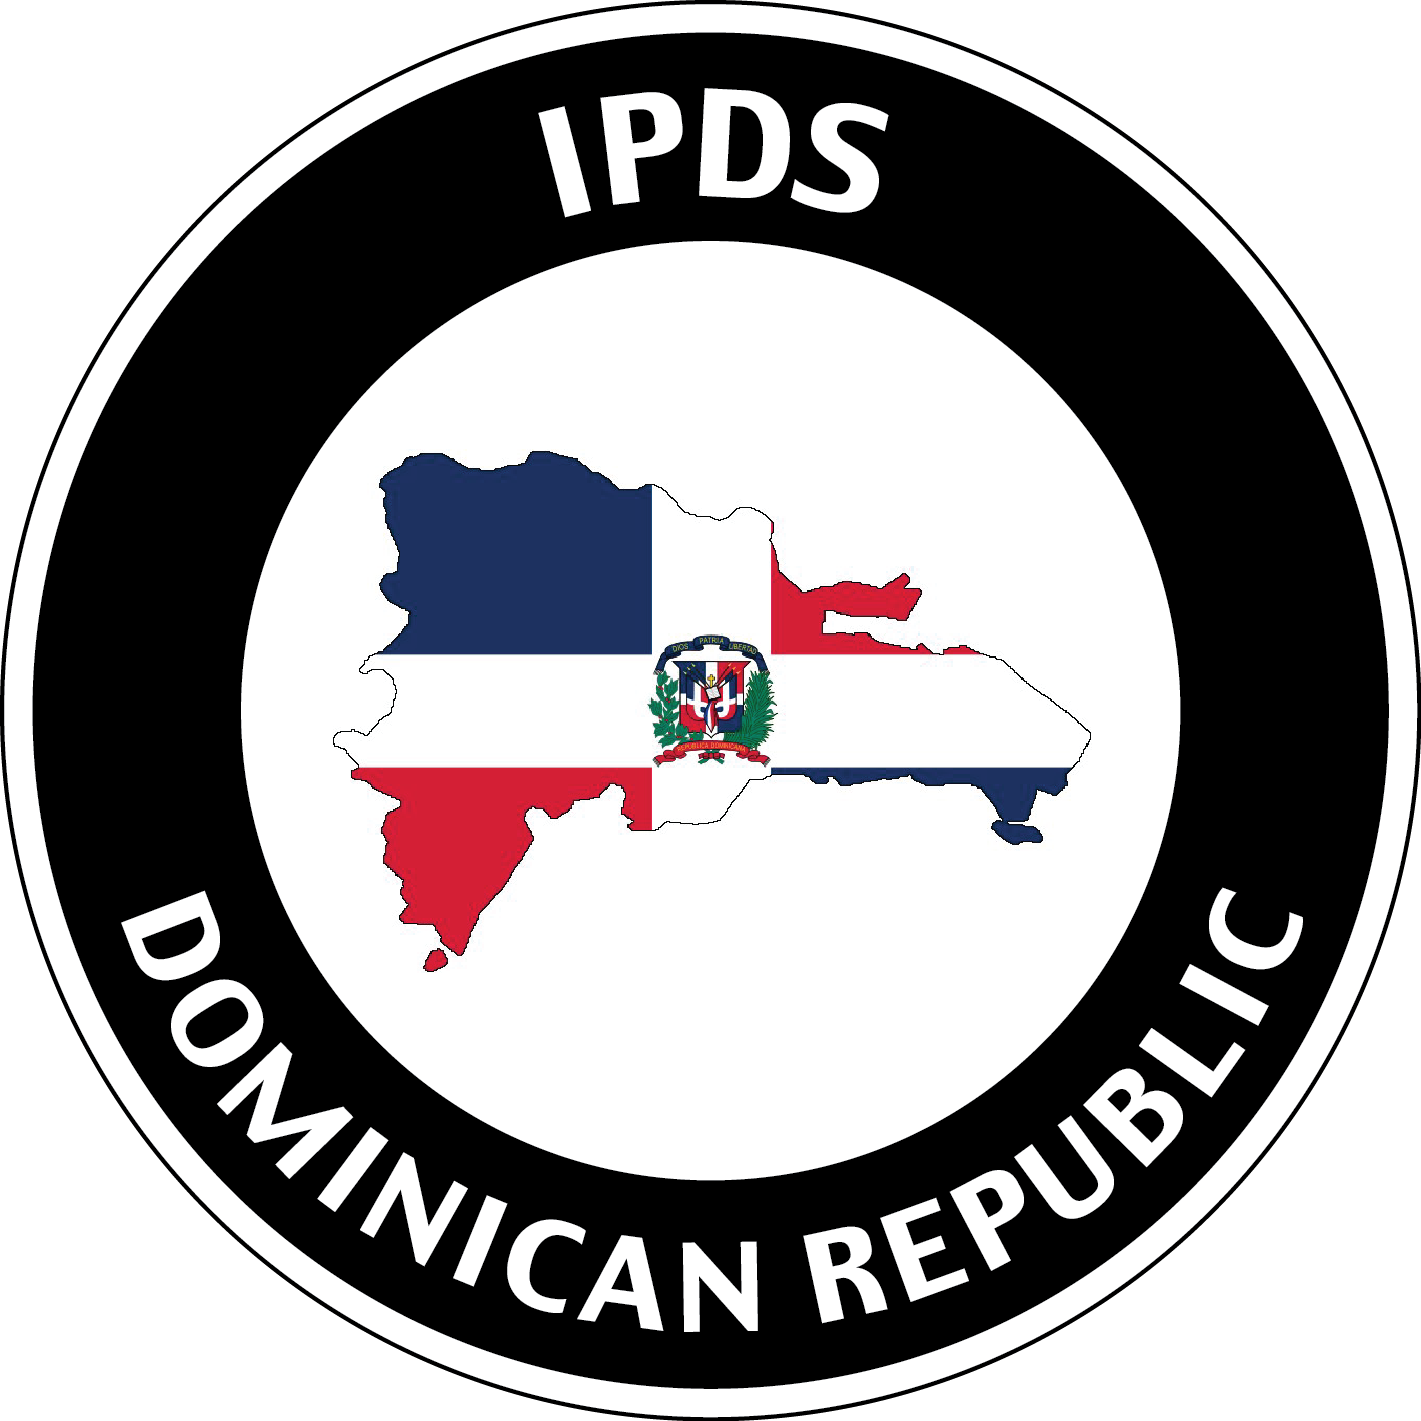 IPDS Dominican Republic icon with country and flag